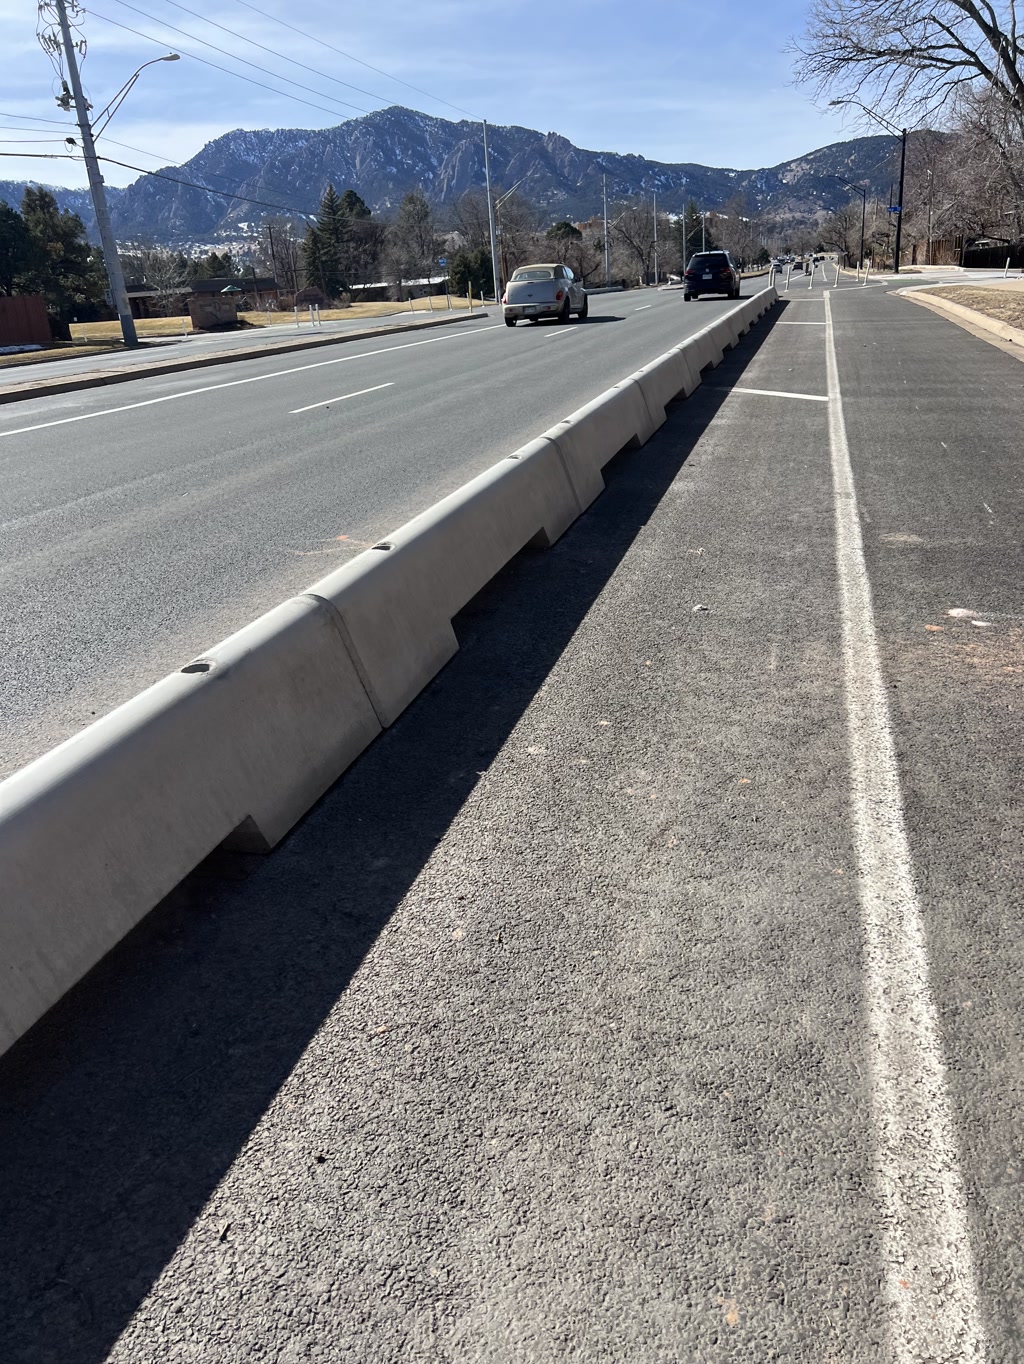 A roadway stretches into the distance with a prominent bike lane on the right-hand side, separated from the main road by a row of concrete barriers, ensuring cyclists' safety. Clear blue skies and a mountain range serve as the backdrop. The lanes are marked by white lines, and there are a few cars visible on the road. There is no text present.